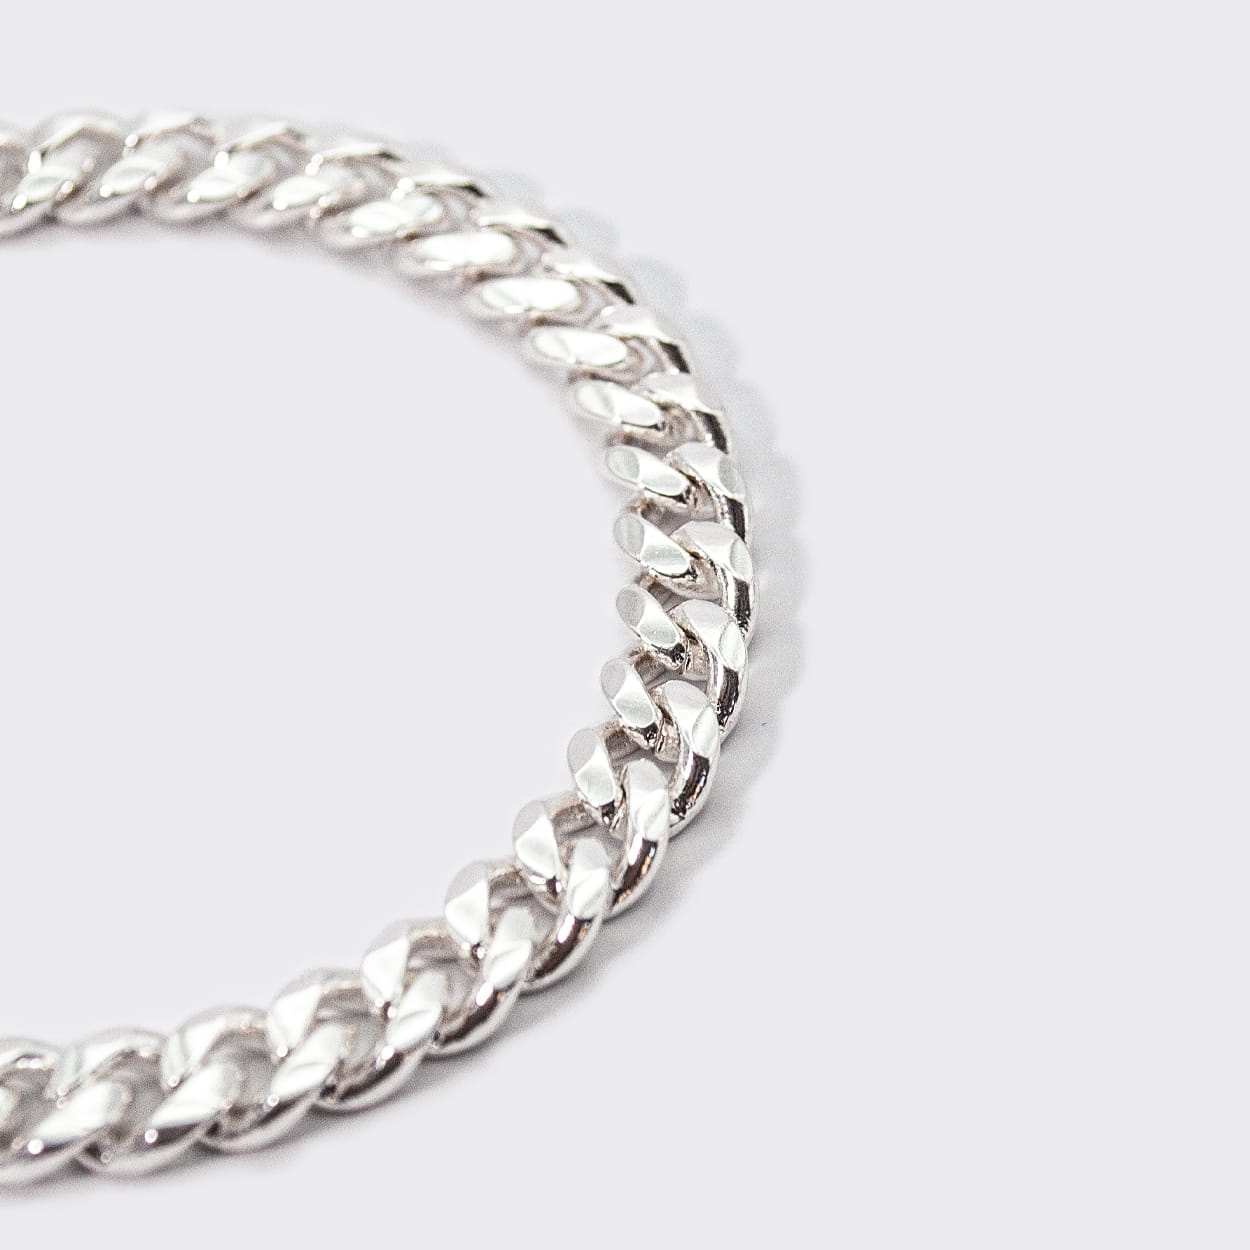 The Havana bracelet is a cuban chain made of a high-quality 925 Sterling silver (10 microns). It is made in Spain and fits both men or women. It is a unisex bracelet.